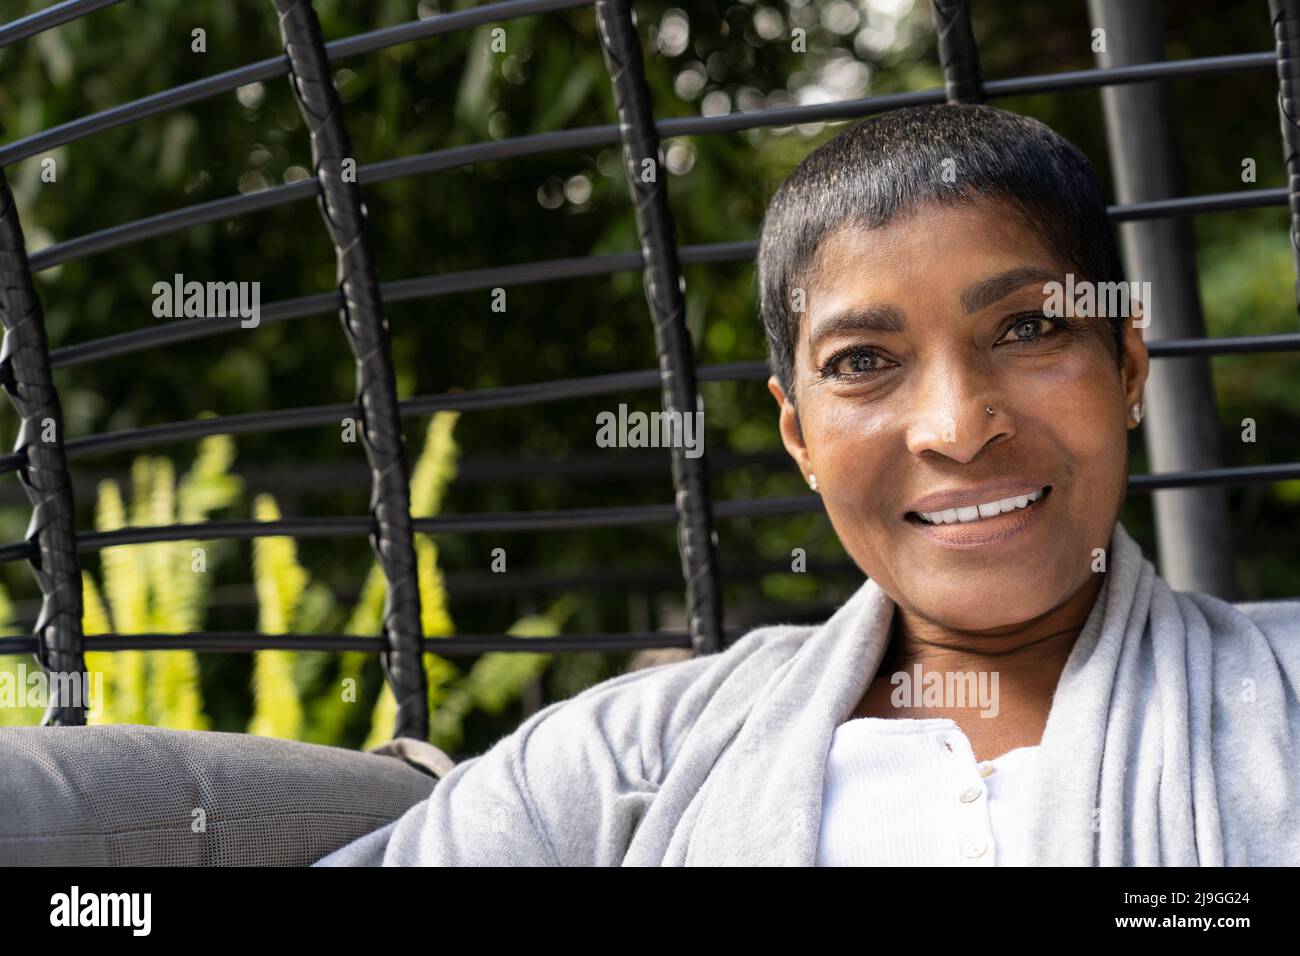 Smiling mature woman sitting on swing chair Stock Photo